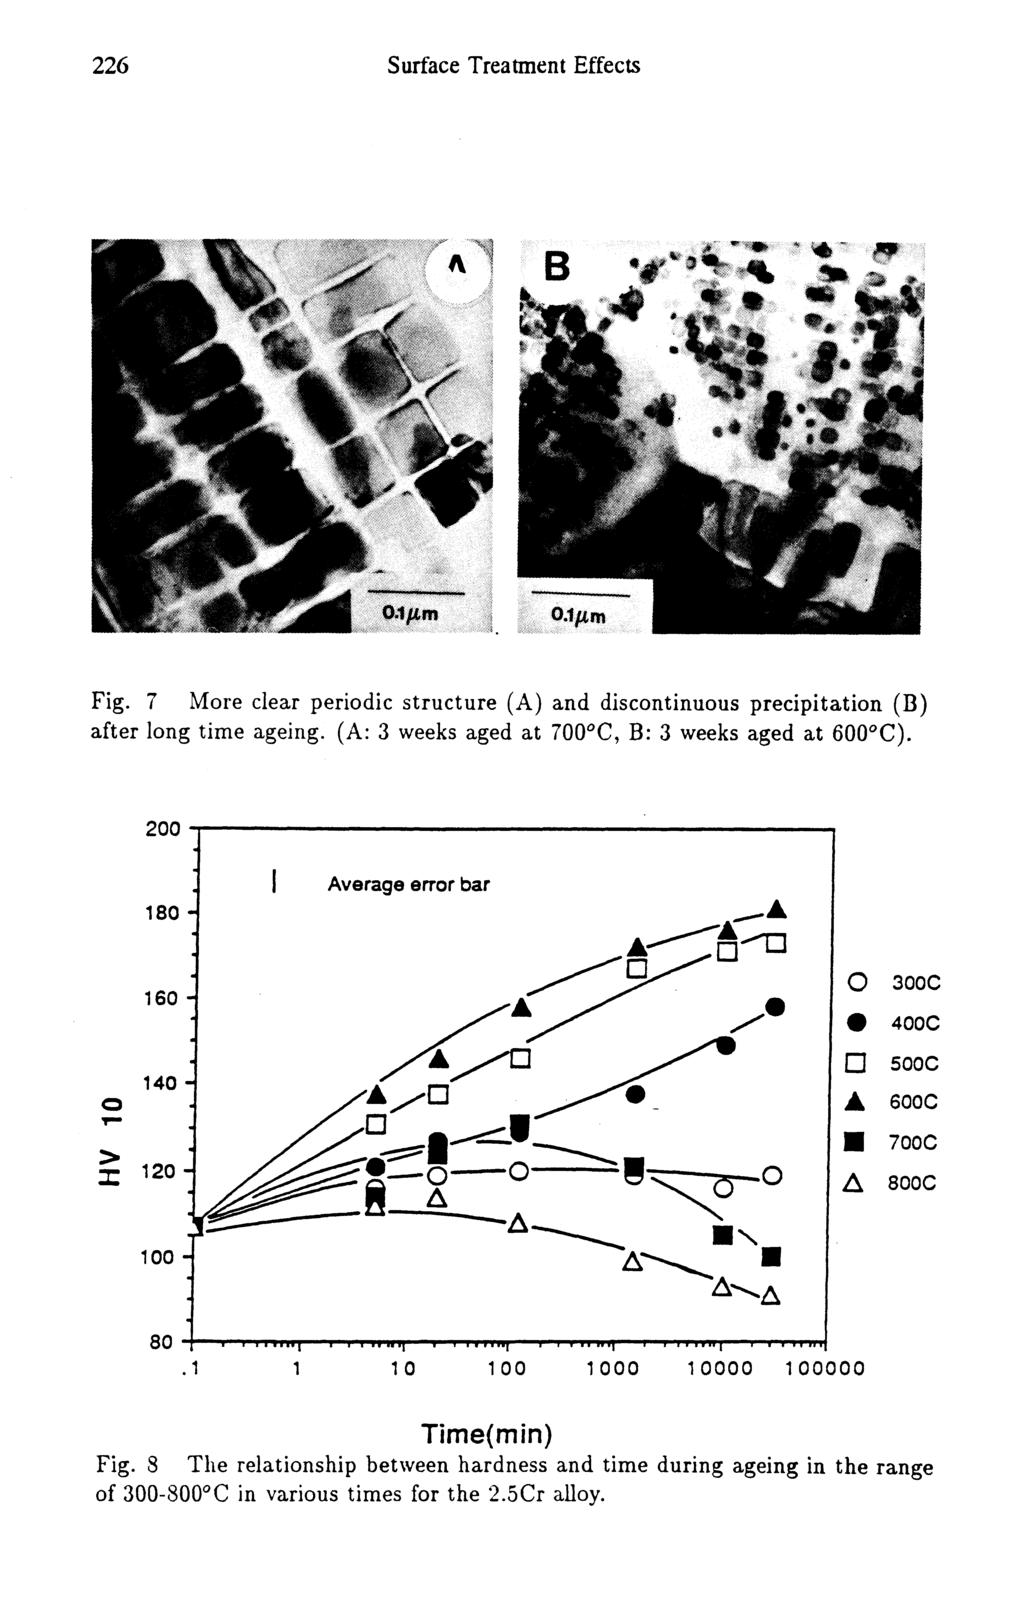 226 Surface Treatment Effects Fig. 7 More clear periodic structure (A) and discontinuous precipitation (B) after long time ageing. (A: 3 weeks aged at 700*C, B: 3 weeks aged at 600 C).